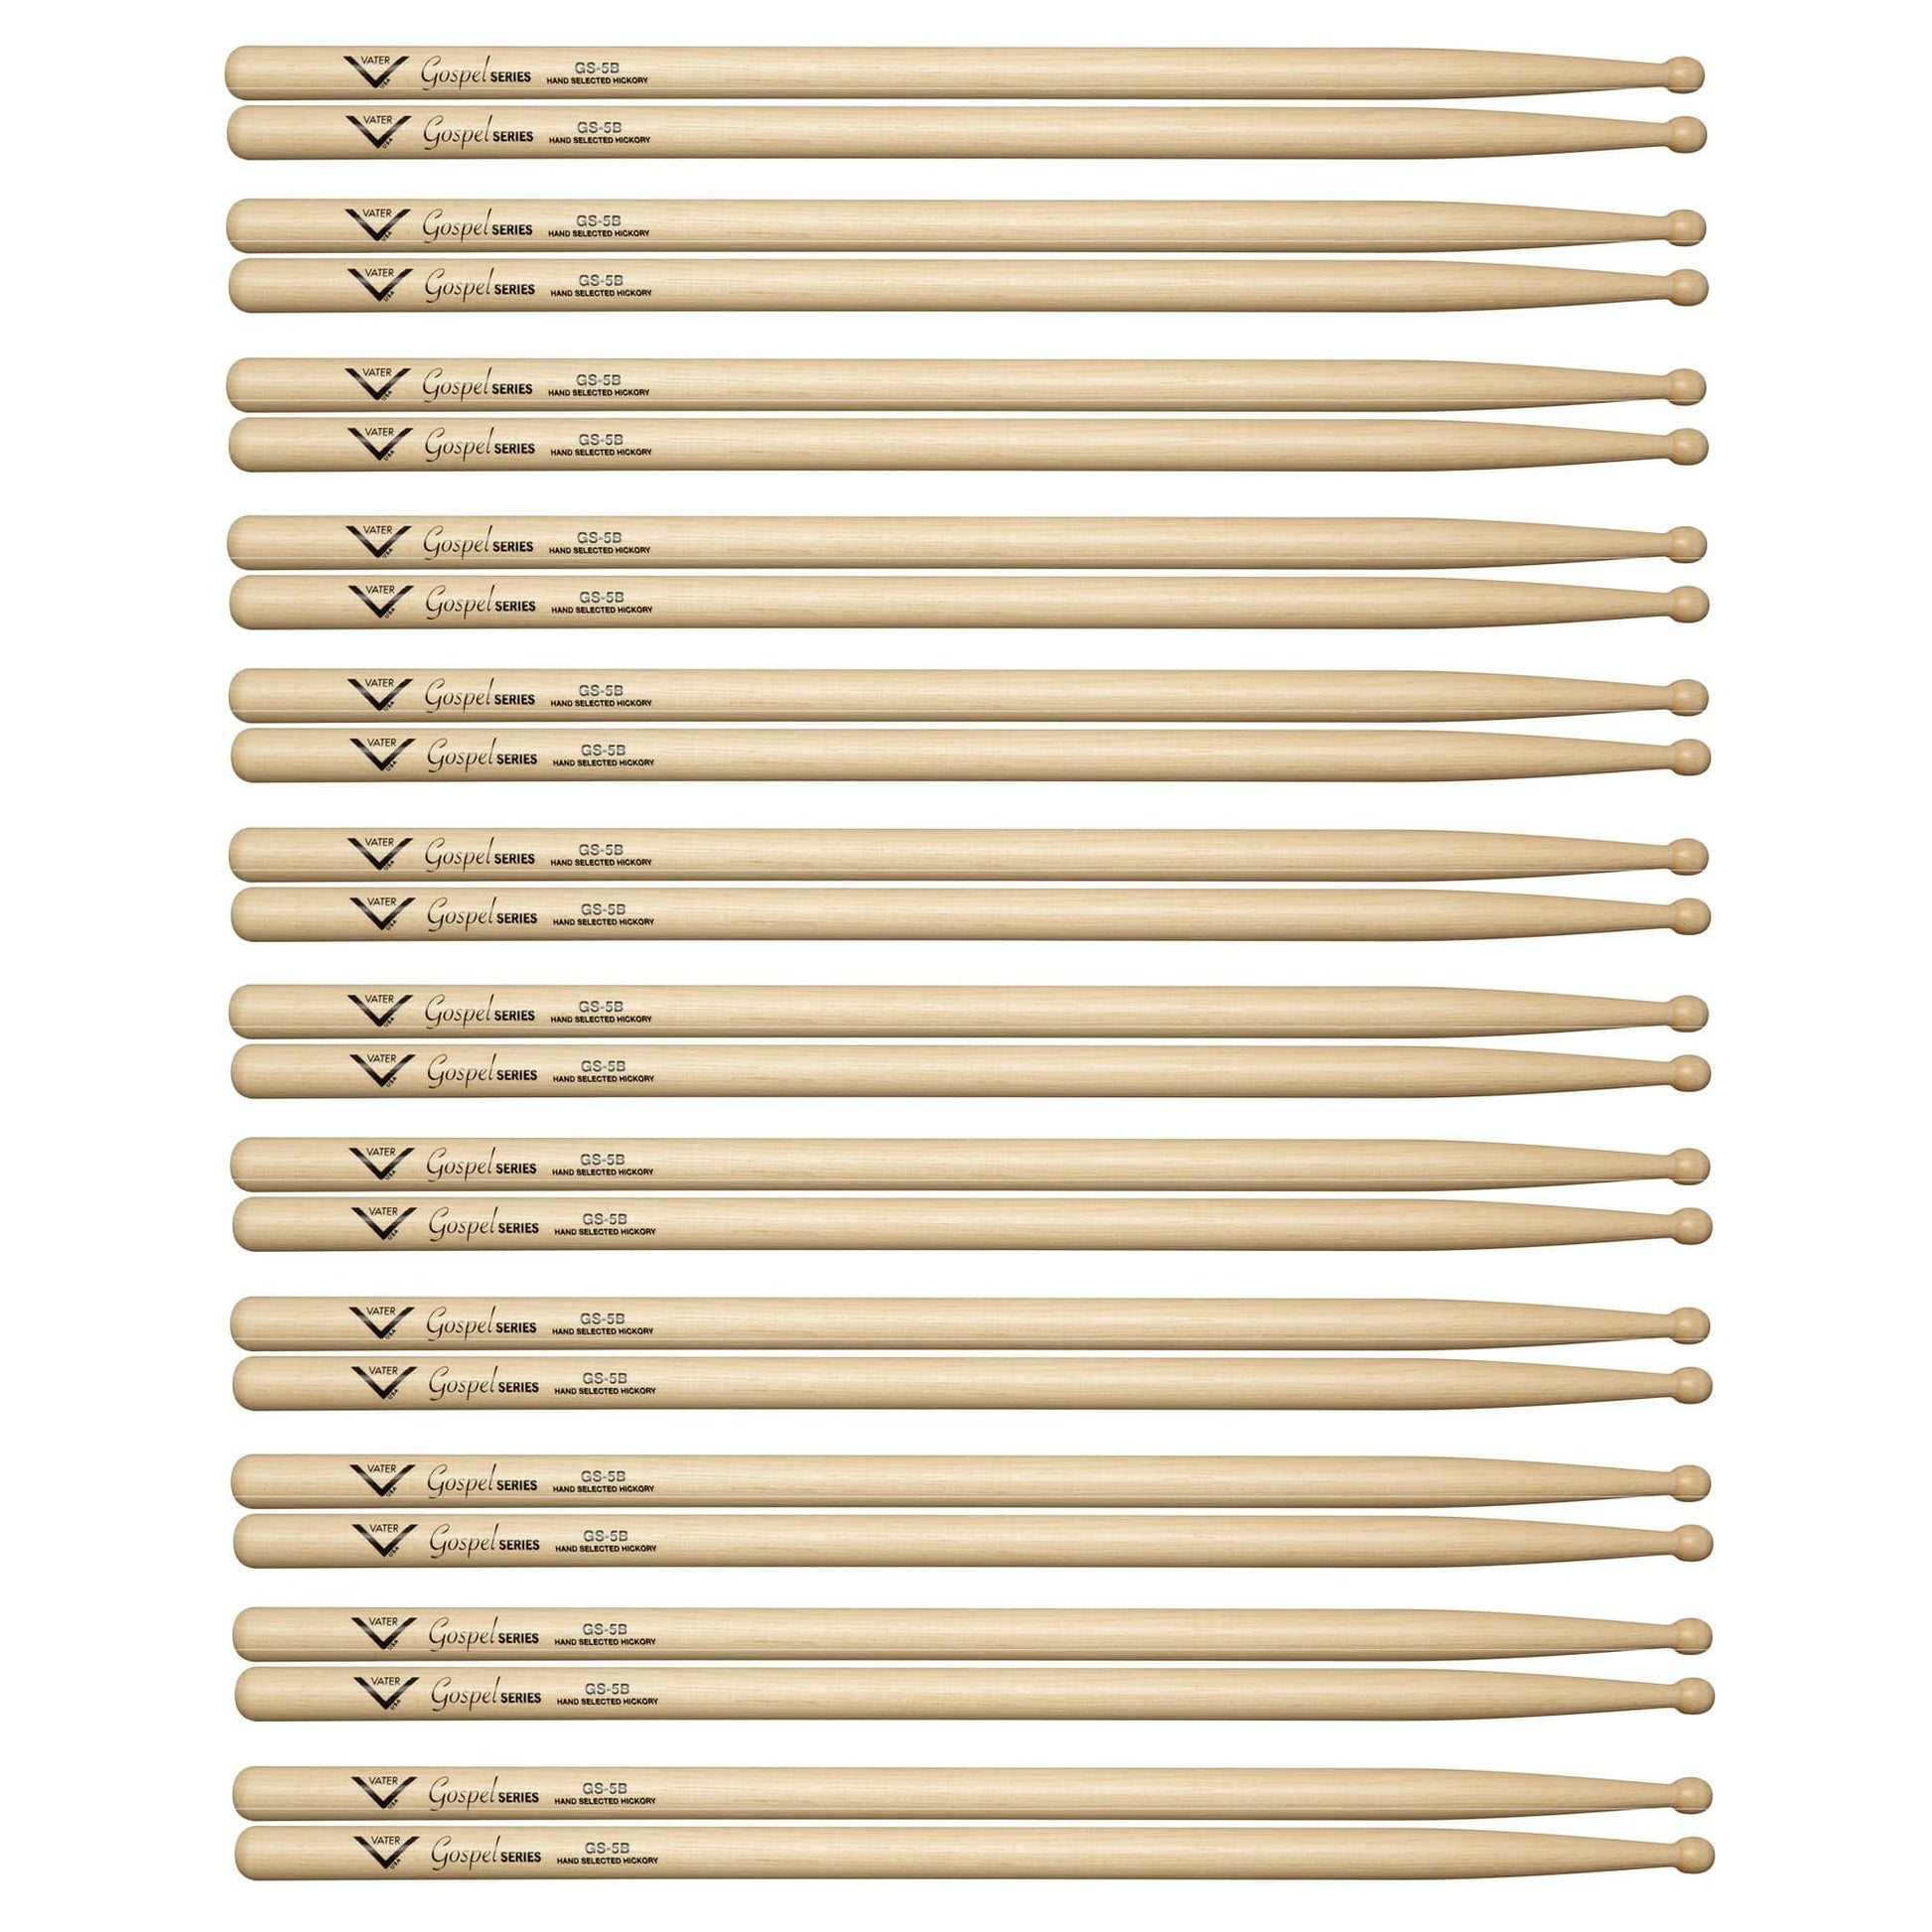 Vater Gospel 5B Wood Tip Drum Sticks (12 Pair Bundle) Drums and Percussion / Parts and Accessories / Drum Sticks and Mallets